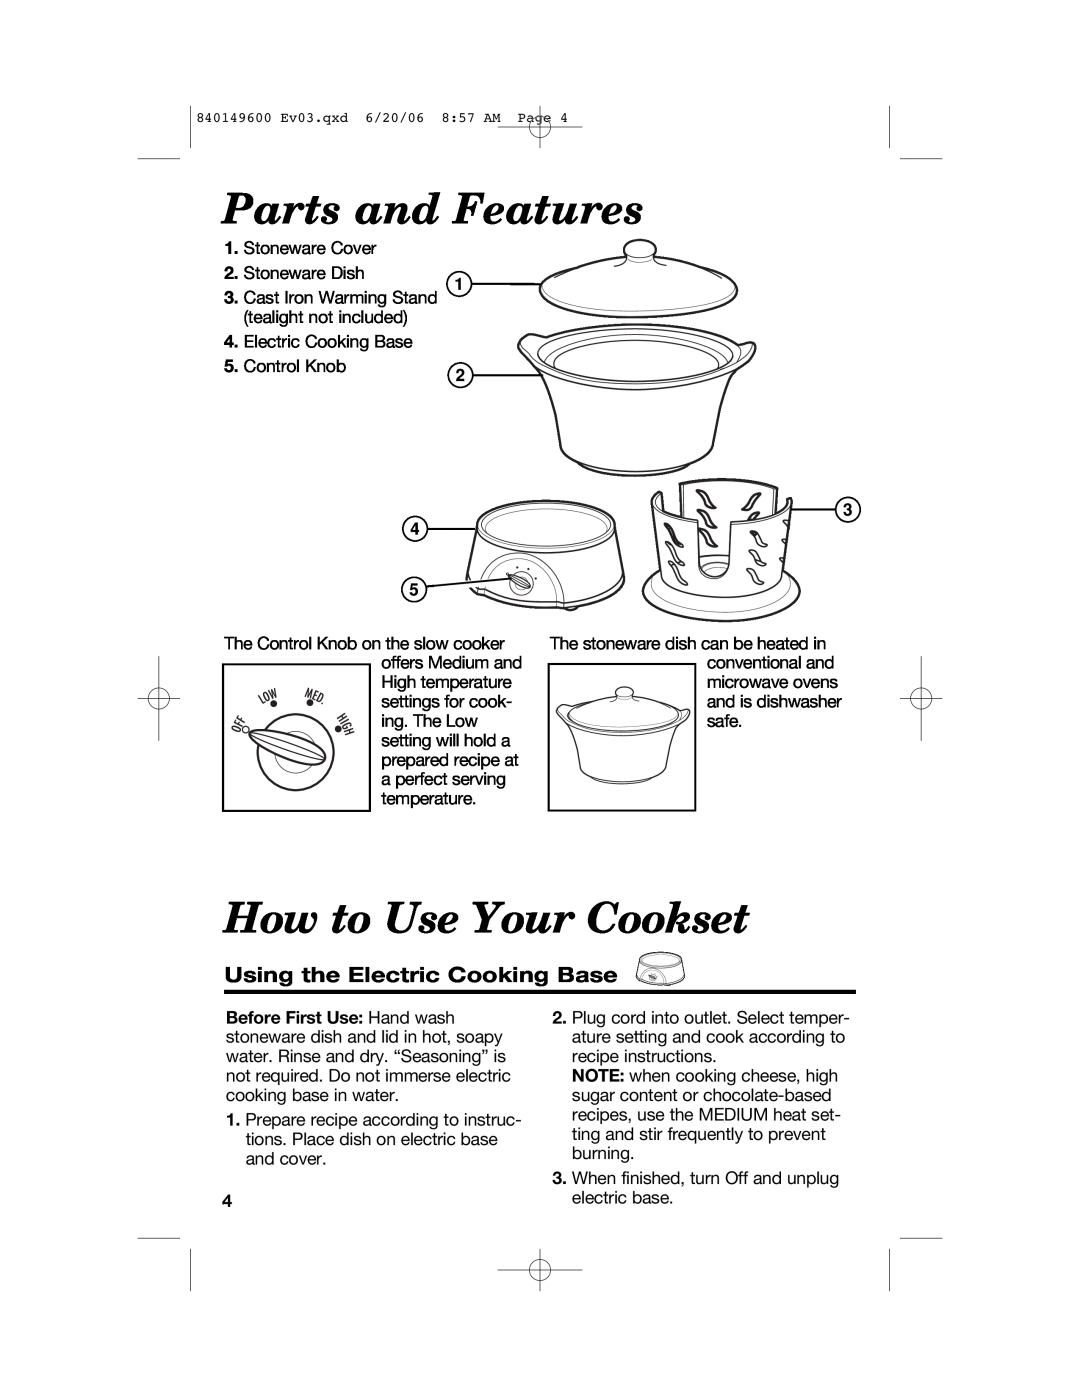 Hamilton Beach 840149600 manual Parts and Features, How to Use Your Cookset, Using the Electric Cooking Base 